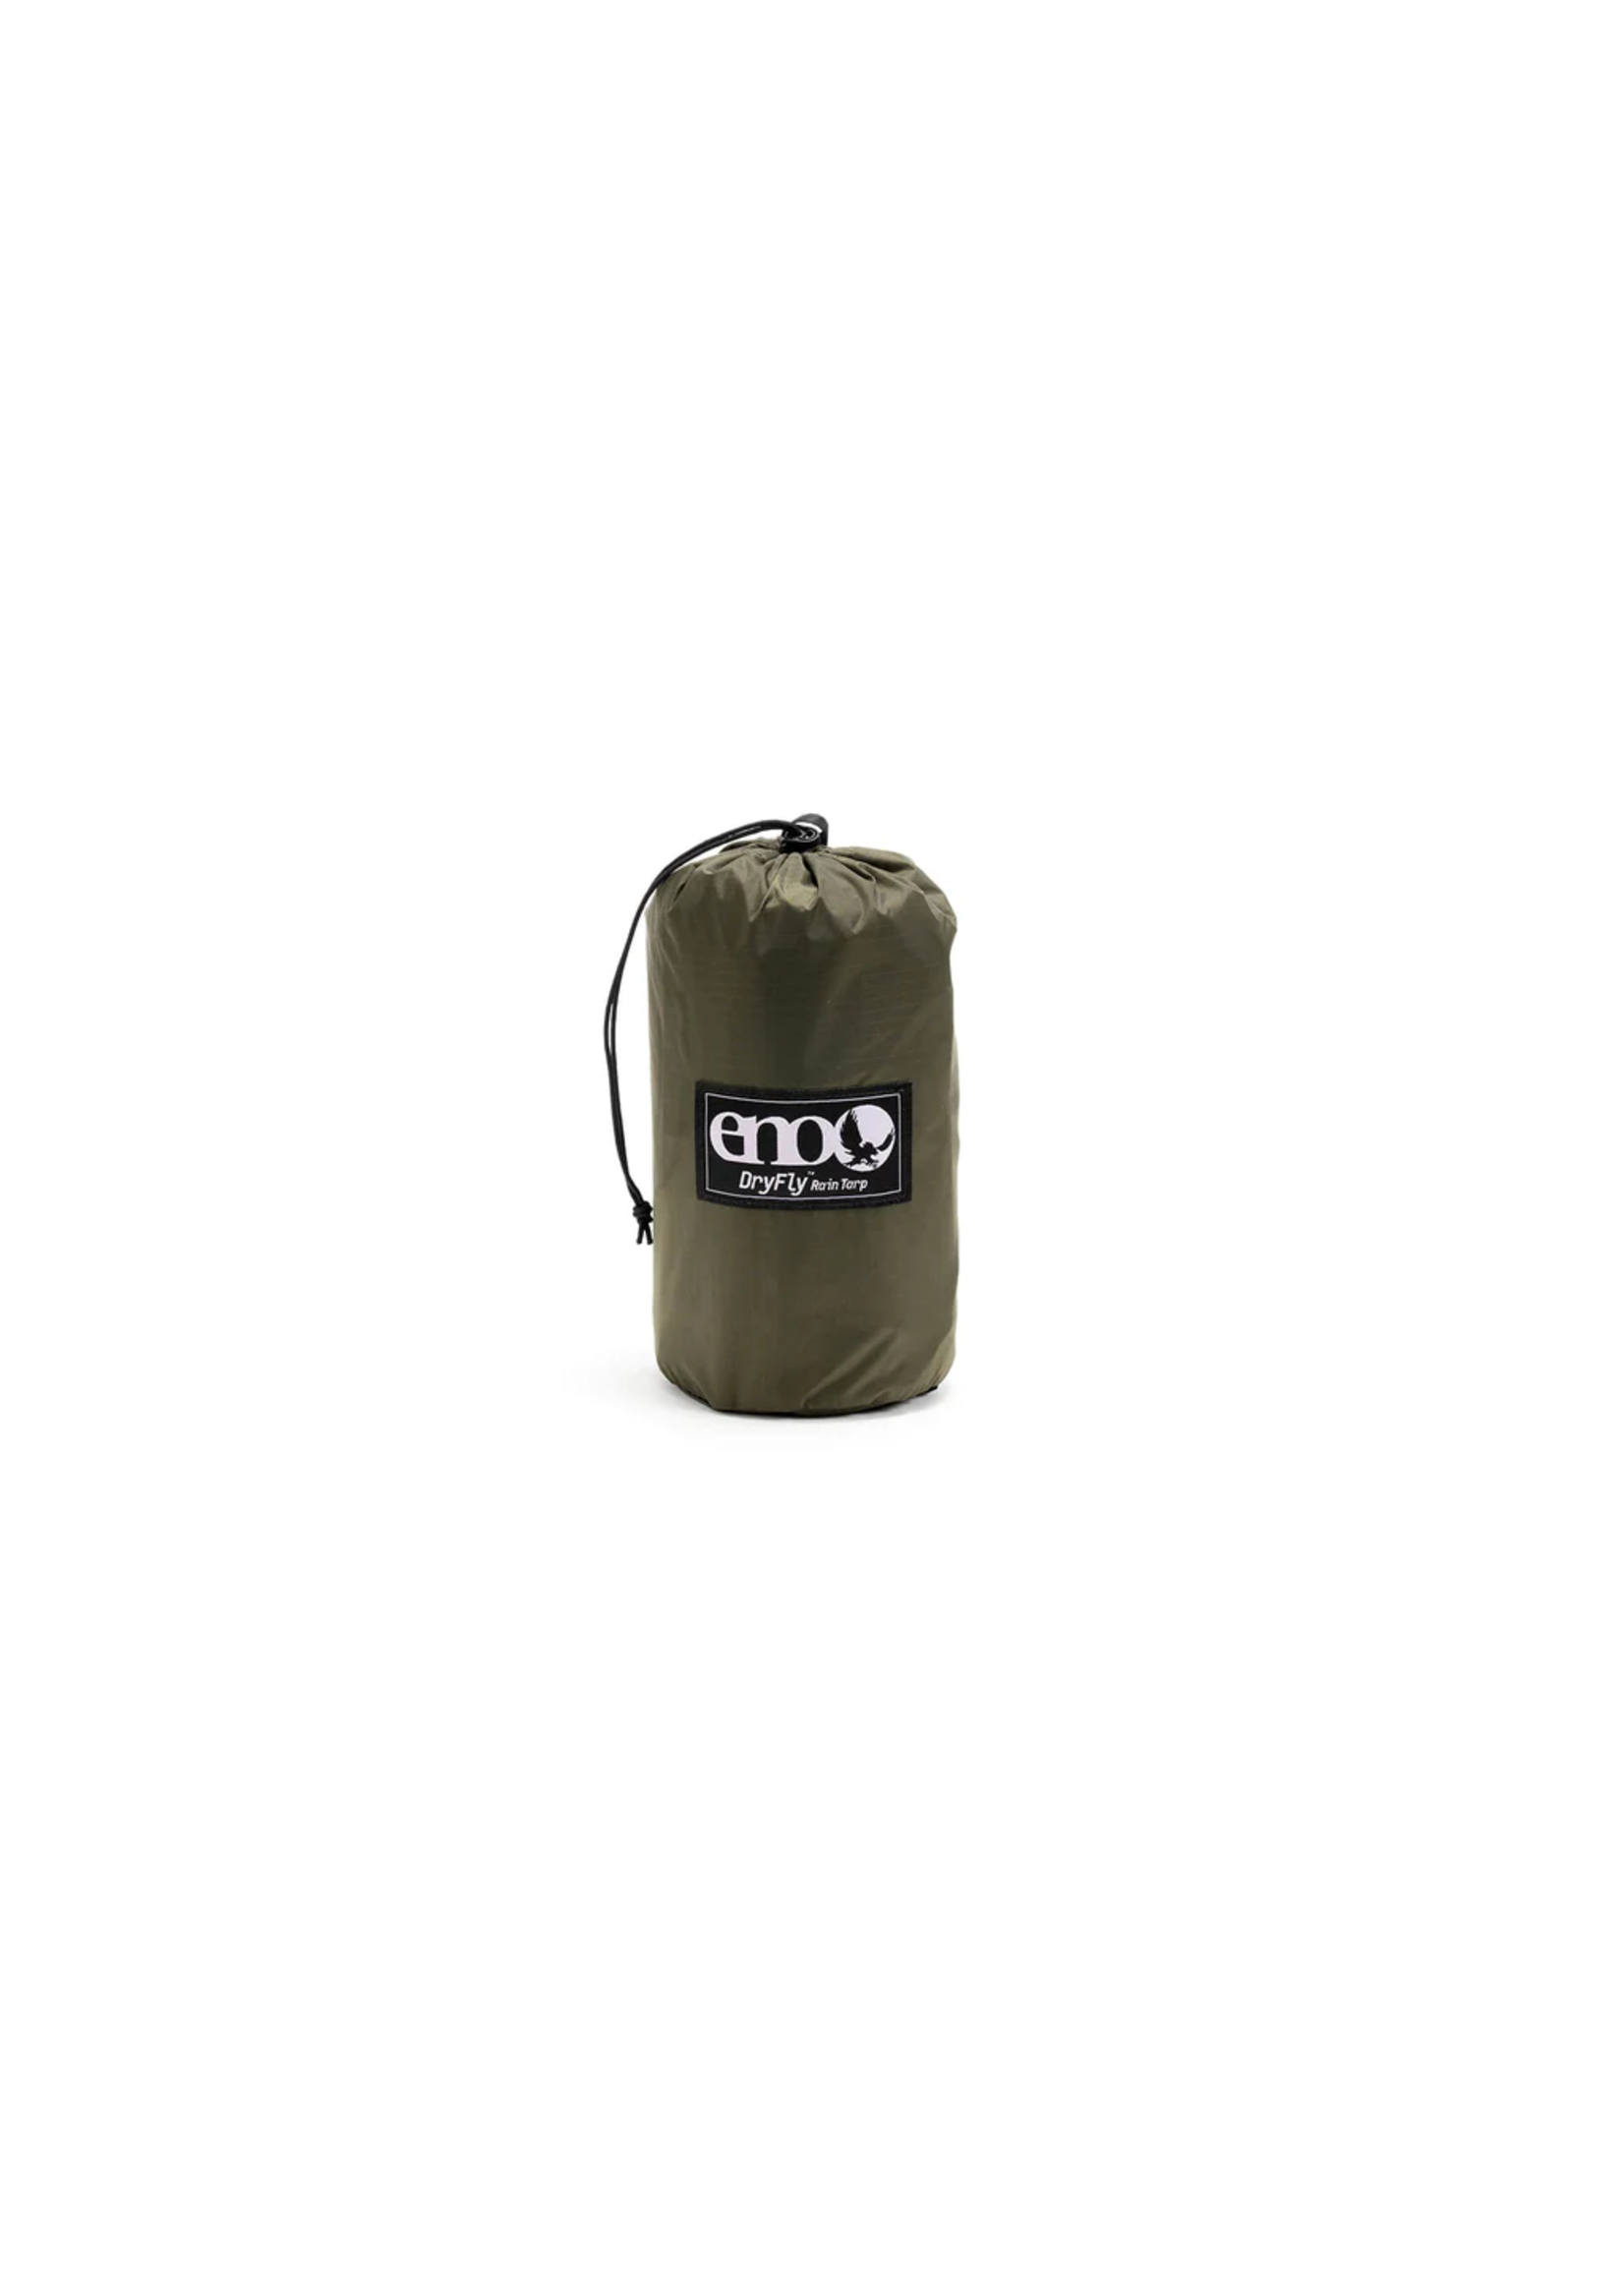 ENO- Eagles Nest Outfitters DryFly Olive